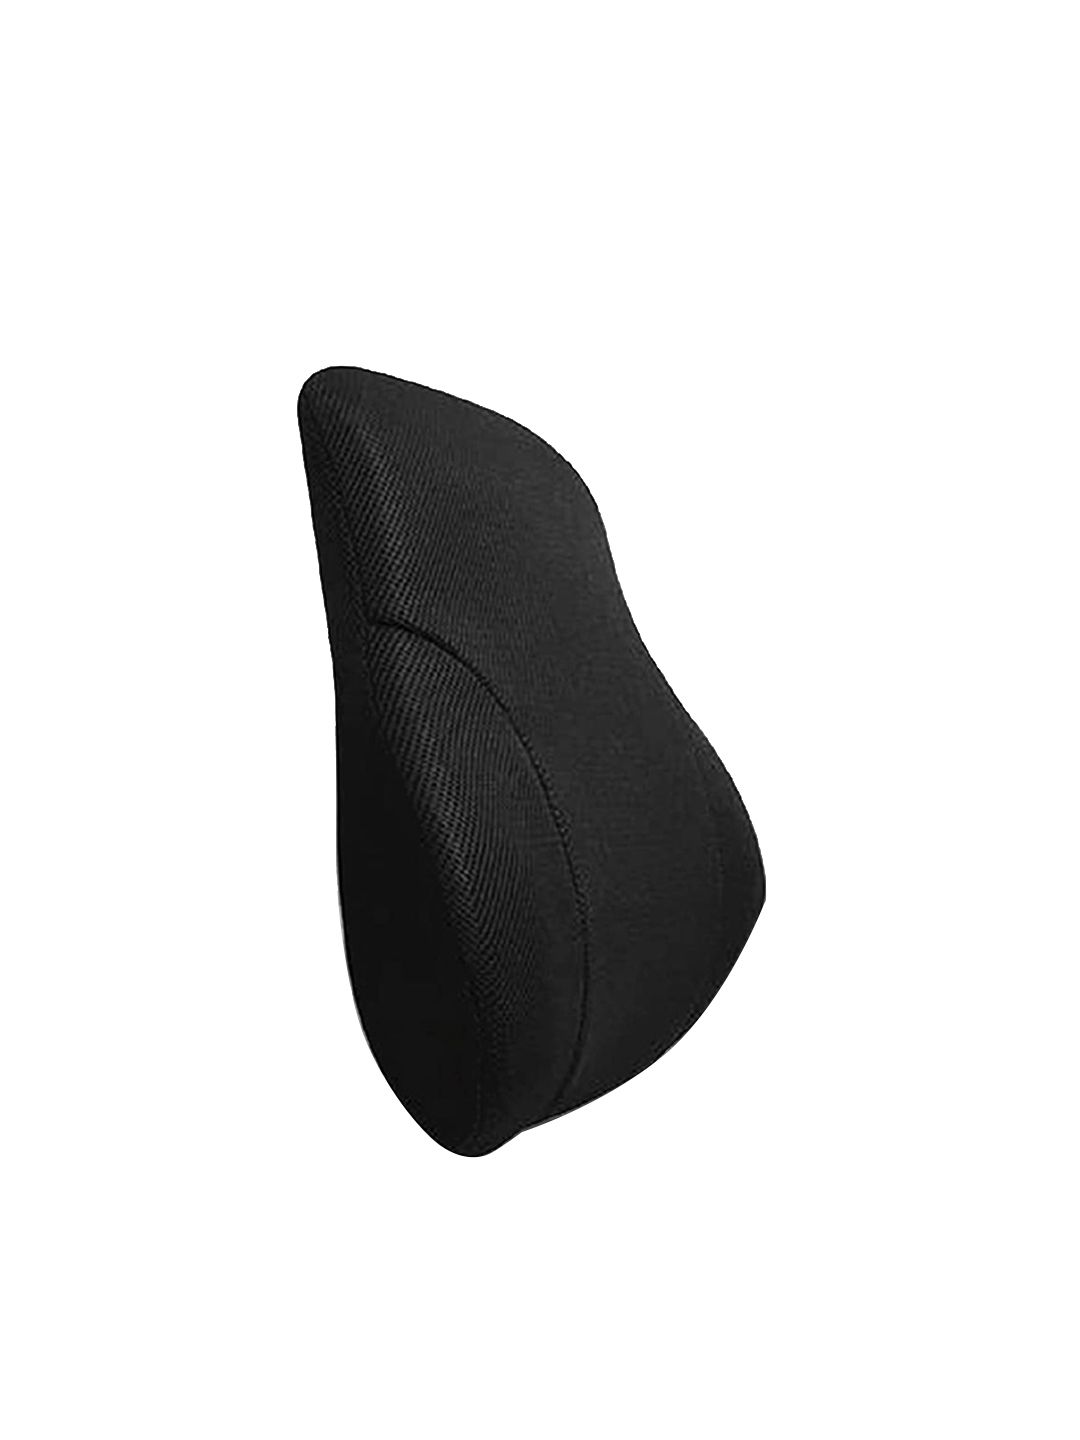 The White Willow Black Memory Foam Lower Back Backrest Pillow Price in India